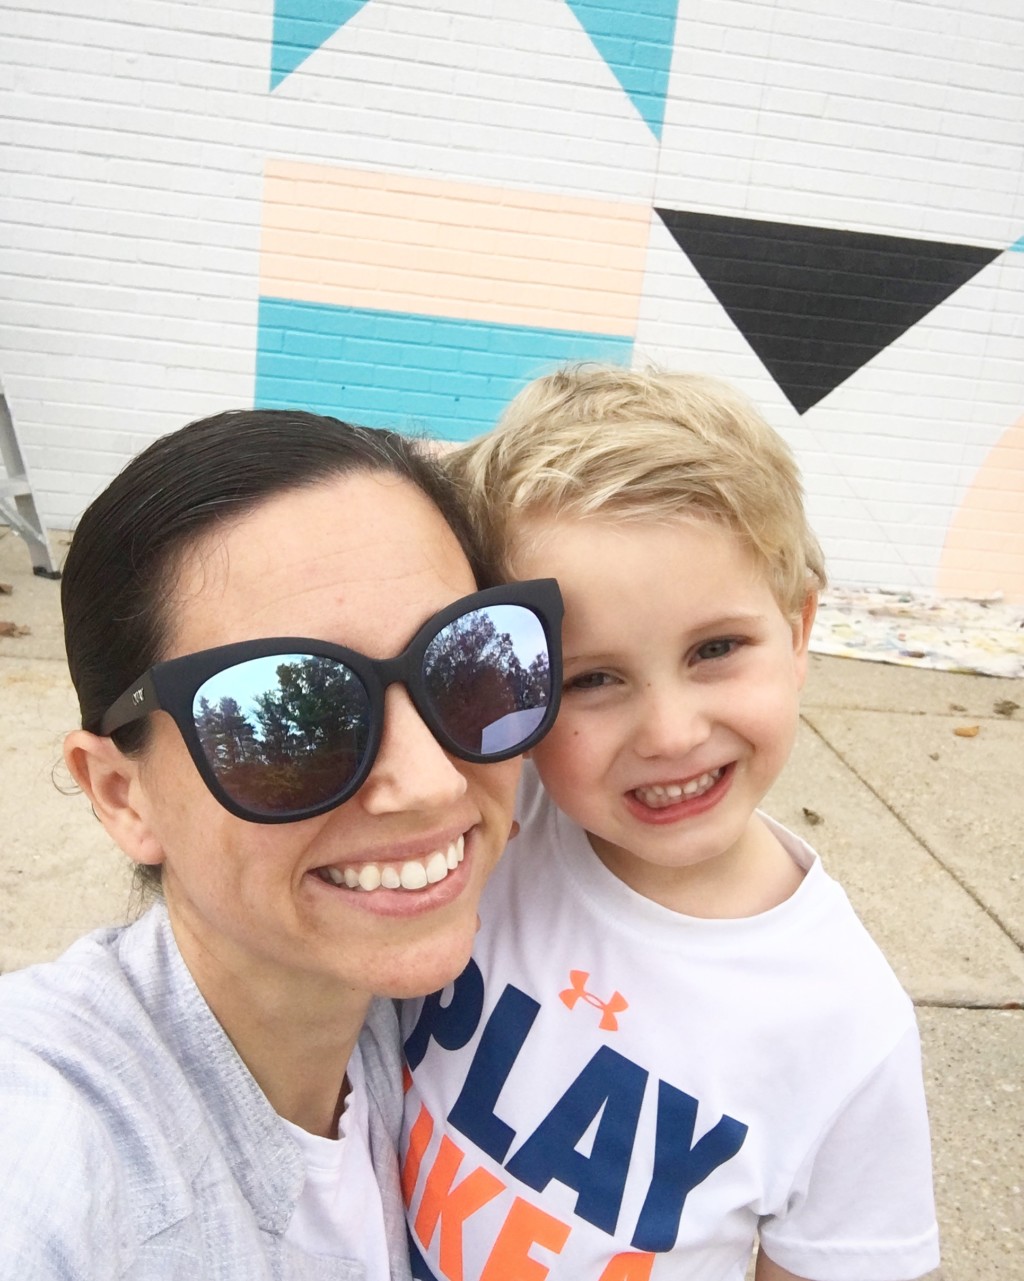 A mother and young son pose together on a sidewalk outside for a happy and smiling selfie.